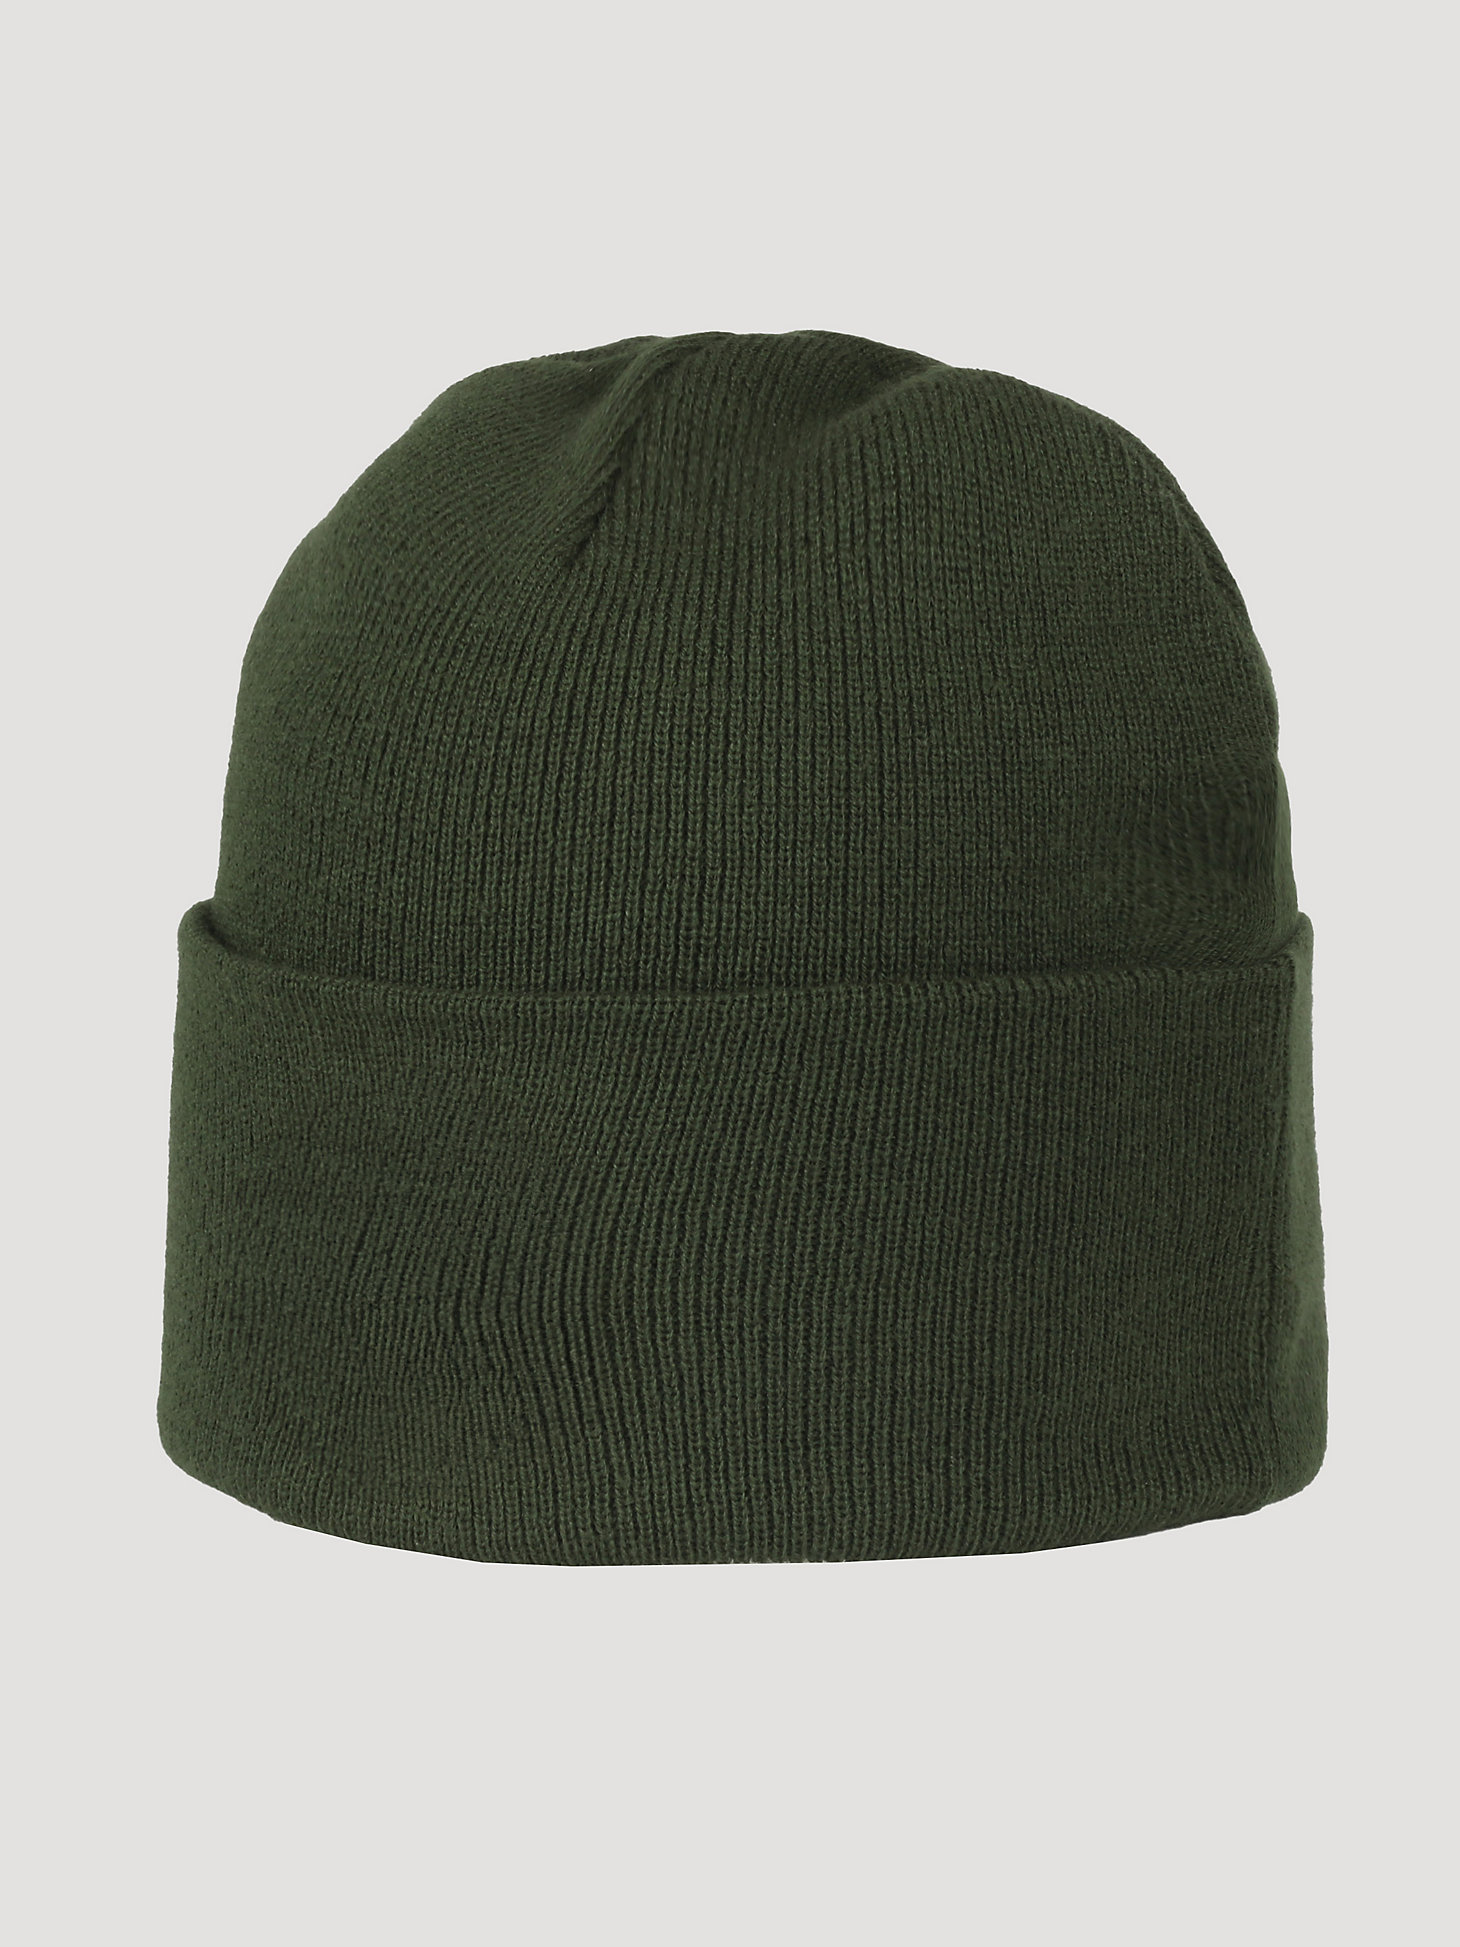 Embroidered Solid Beanie in Olive alternative view 1